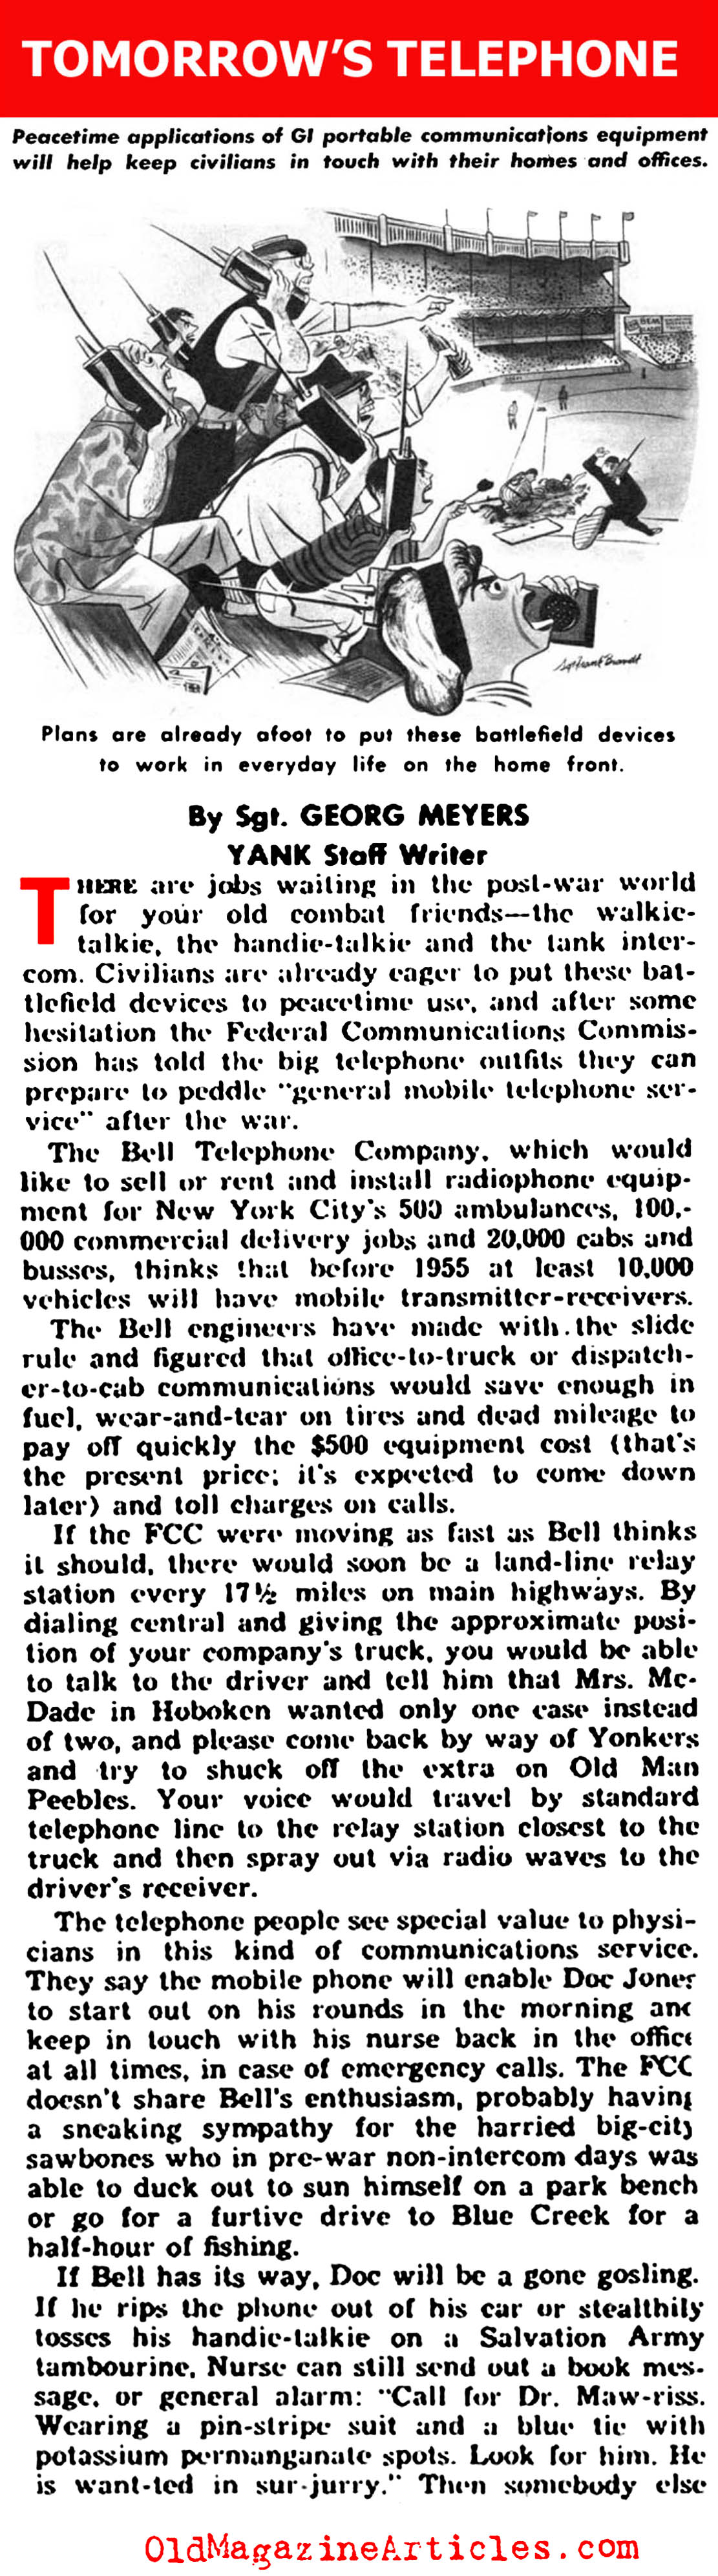 Walkie-Talkies and the Anticipation of Cell Phones in 1945 (Yank Magazine, 1945)